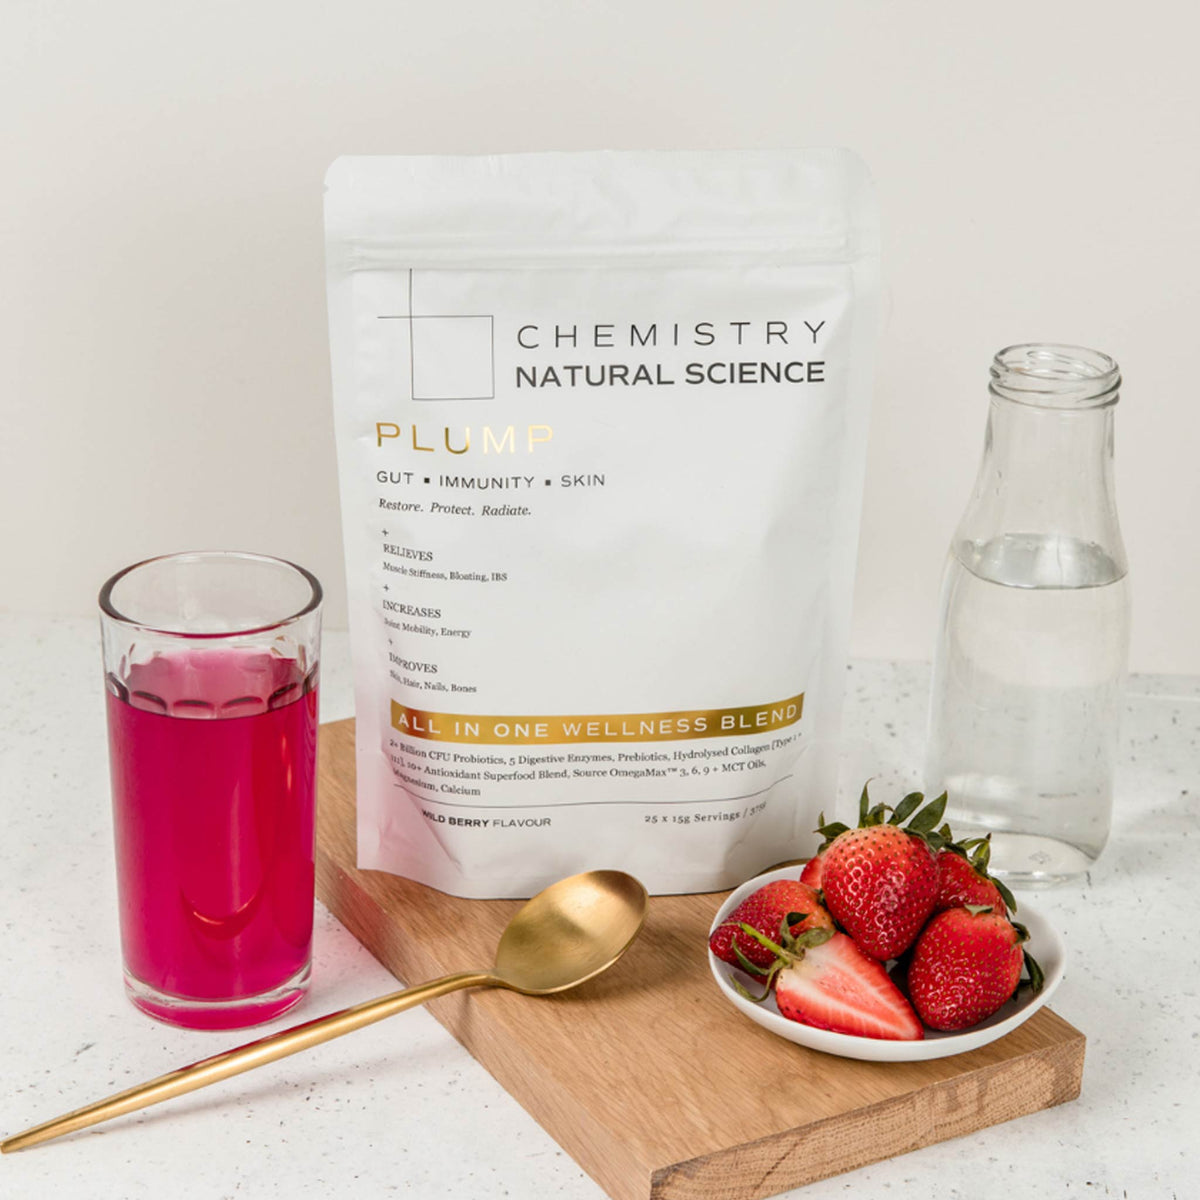 Chemistry Natural Science Plump 375g